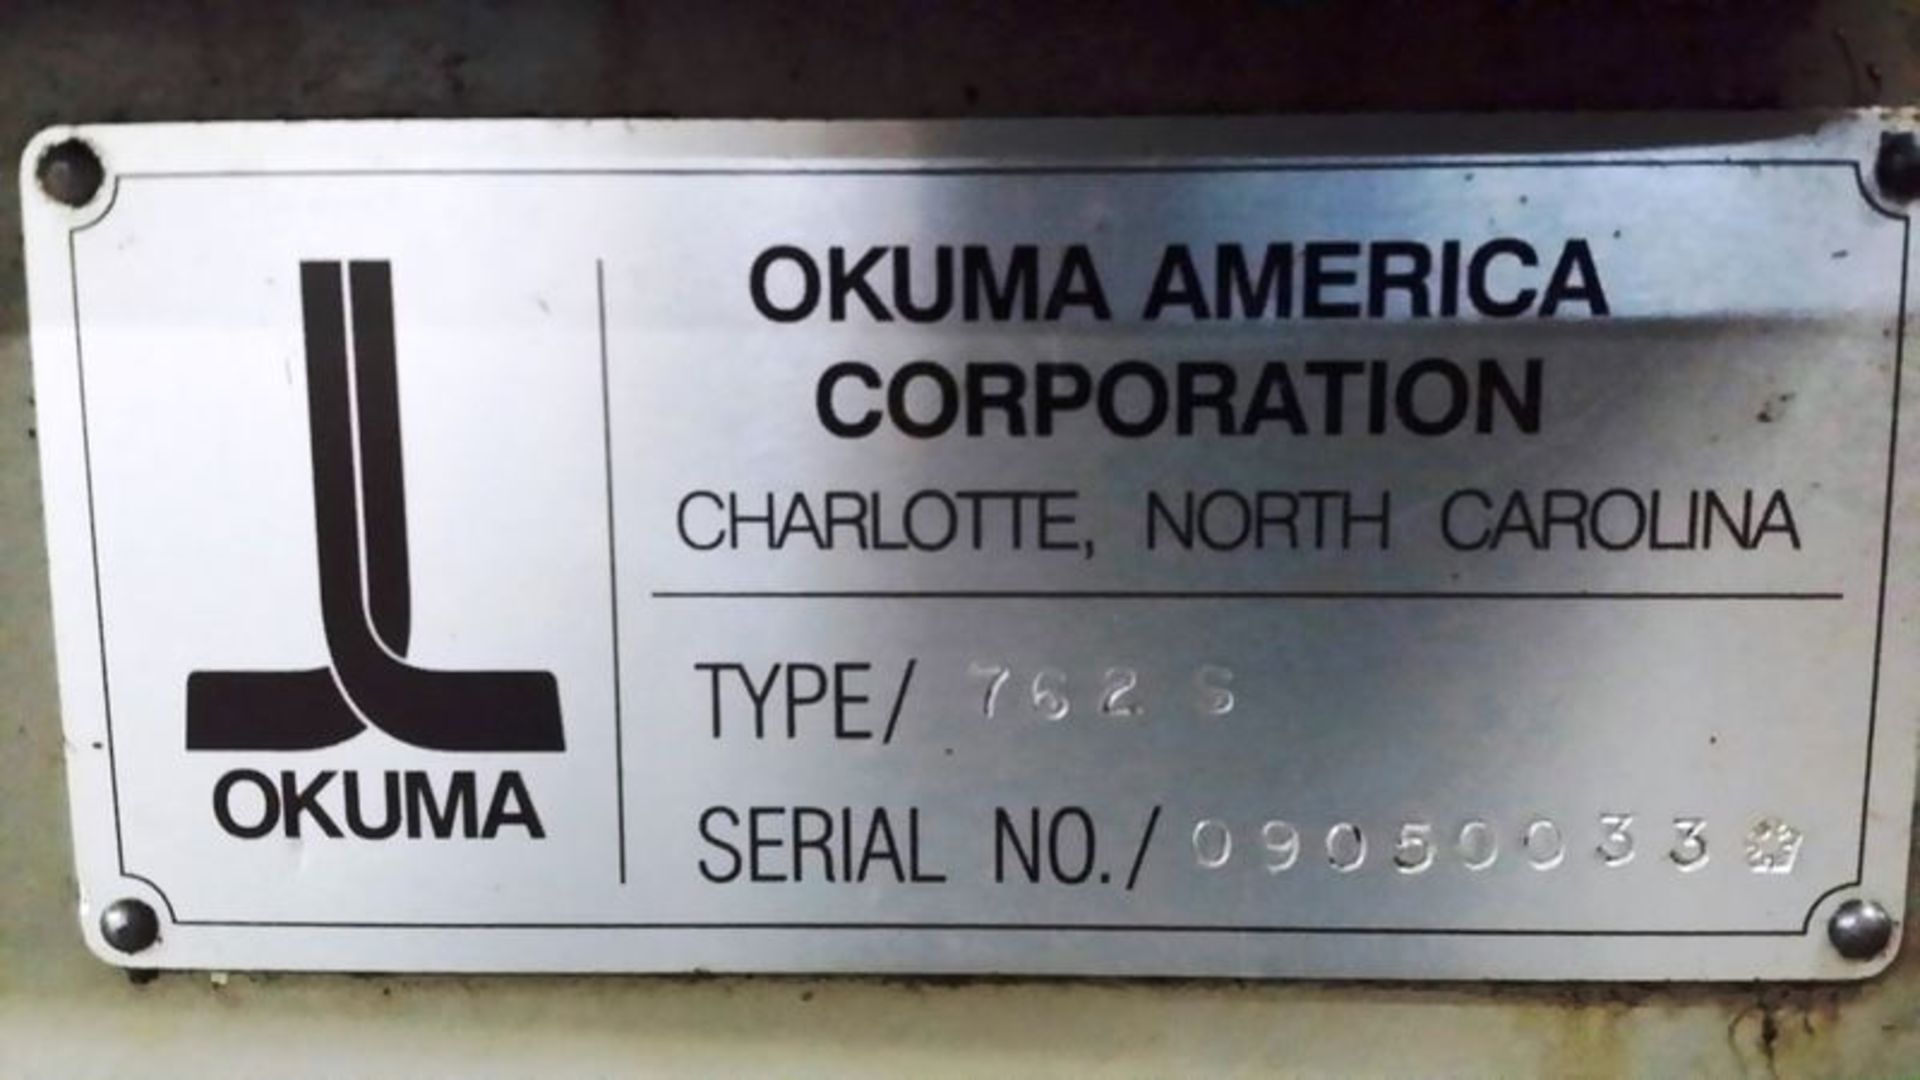 OKUMA CROWN-S762BB BIG BORE 2-AXIS CNC TURNING CENTER, S/N 33, NEW 1997 - Image 11 of 11